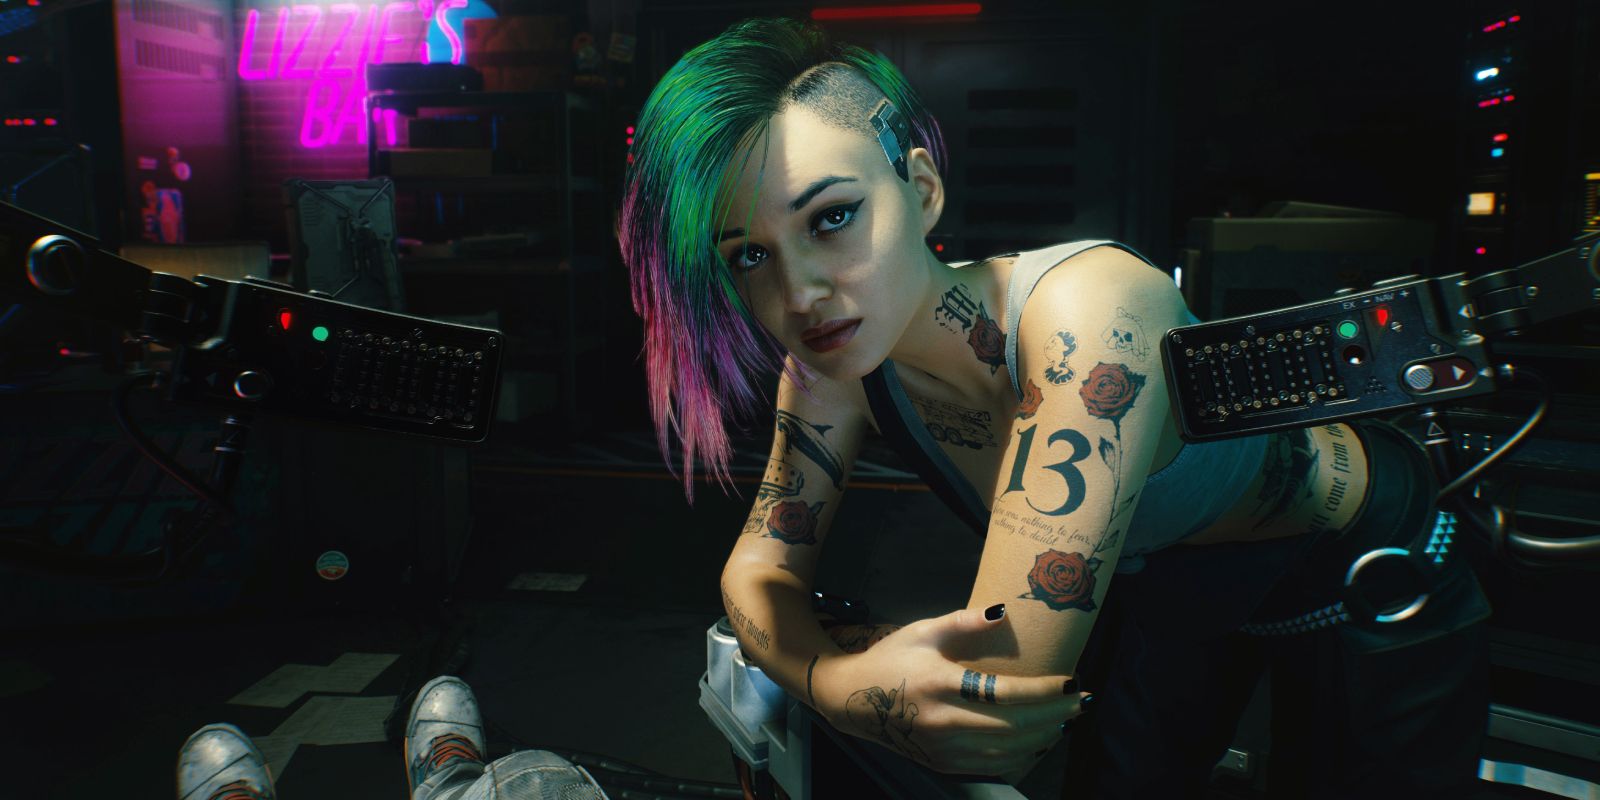 Cyberpunk character with tattoos and dyed hair